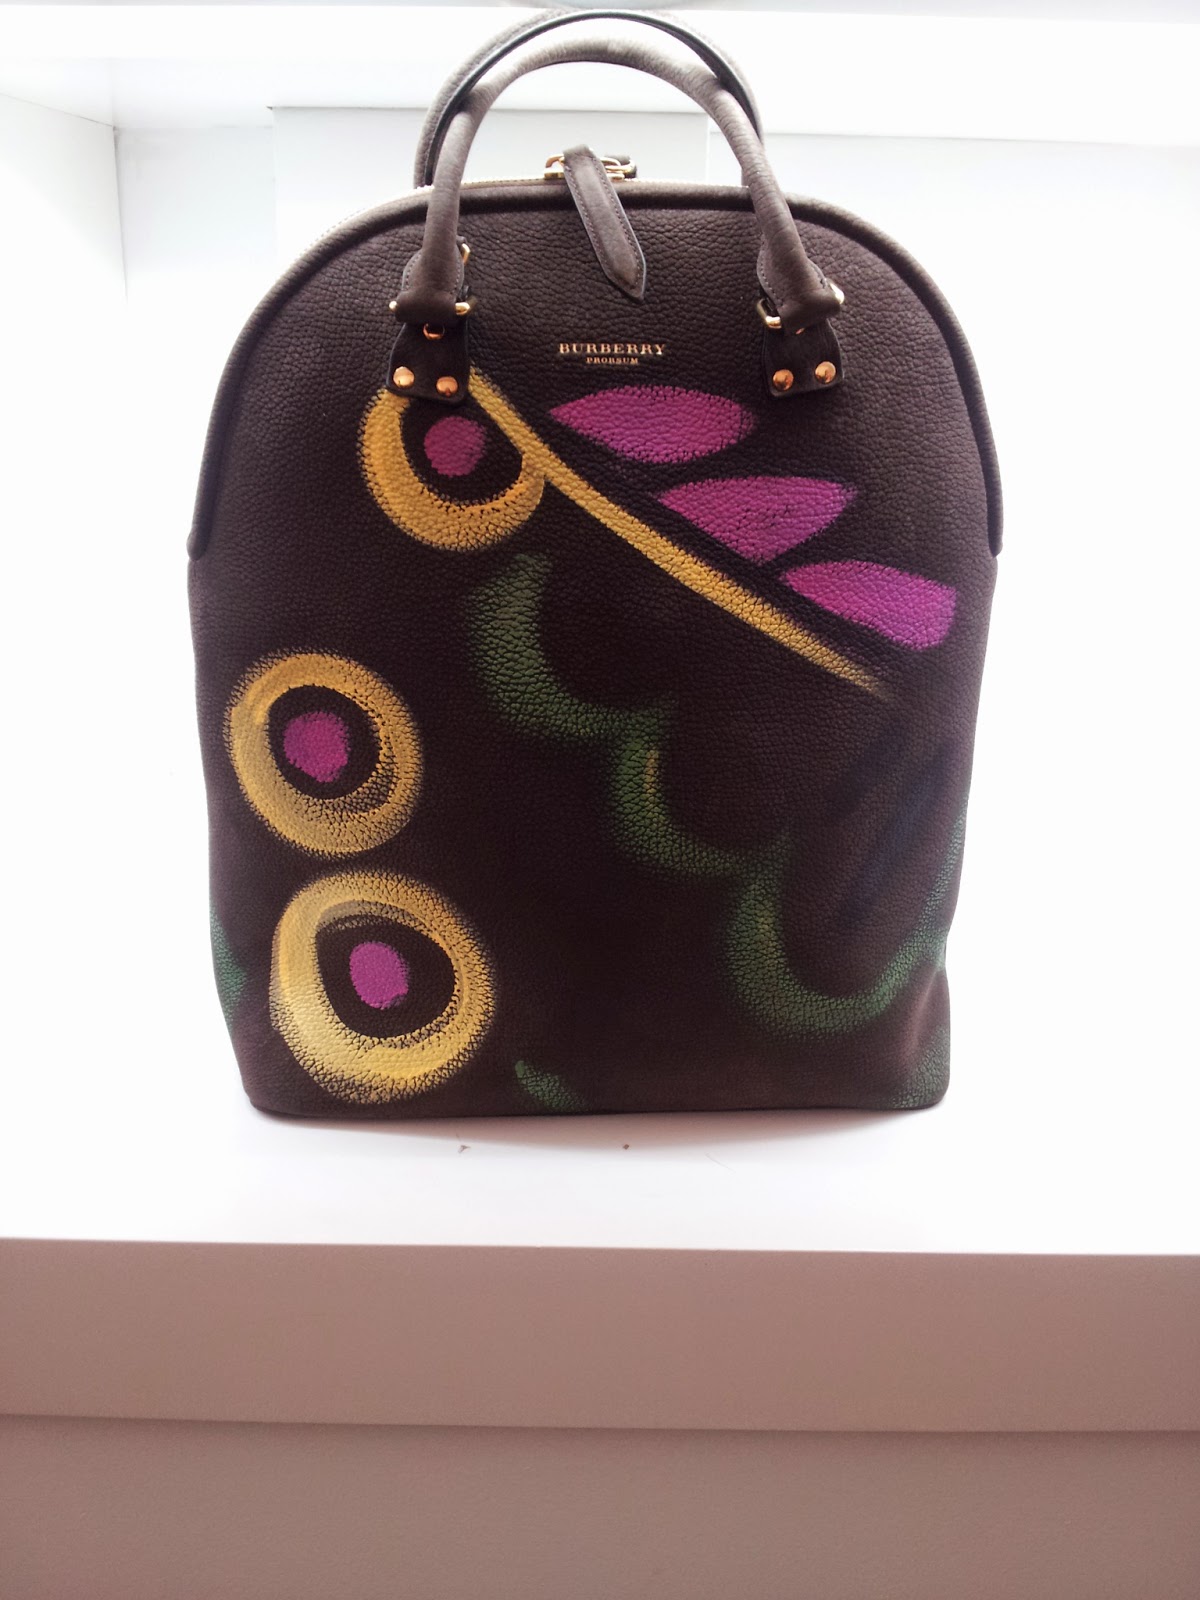 Discount Kate Spade Bags Canada | Confederated Tribes of the Umatilla Indian Reservation